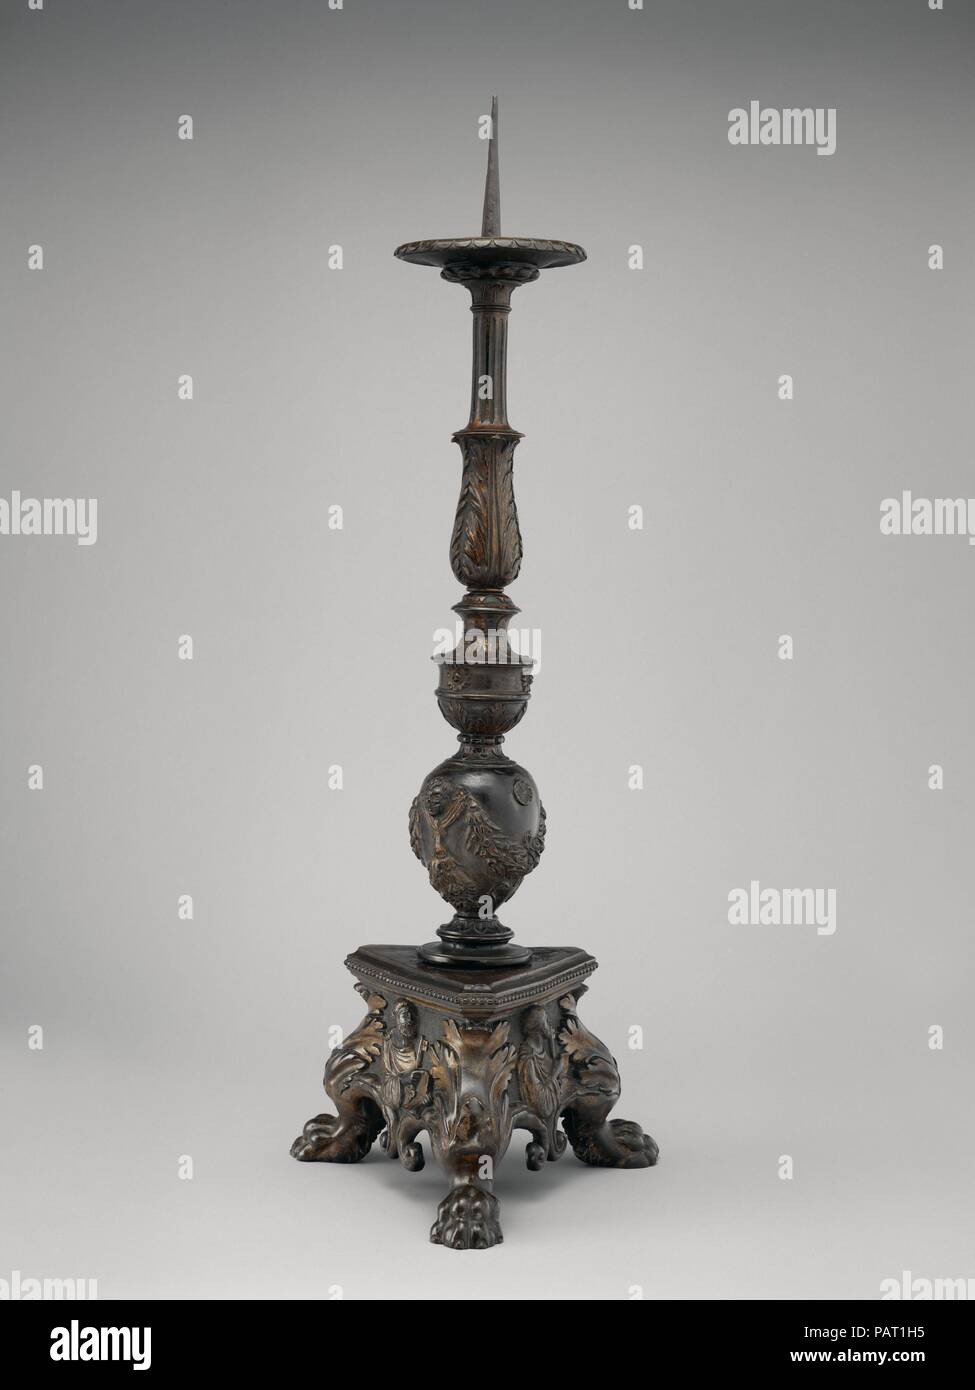 Pricket candlestick (one of a pair). Artist: Workshop of Vincenzo Grandi (mentioned 1507-1577/78); and Gian Gerolamo Grandi (1508-1560). Culture: Italian, Trent or Padua. Dimensions: Overall (confirmed): 36 1/2 × 12 1/2 × 13 in. (92.7 × 31.8 × 33 cm). Date: ca. 1545-50.  Analogies of texture and composition (figures from which a Byzantine stiffness has not altogether disappeared) between these and three flagpole stands by Alessandro Leopardi in Piazza S. Marco, Venice, permit an attribution of the candlesticks at least to Leopardi's sphere of influence. The candlesticks were part of a set of s Stock Photo